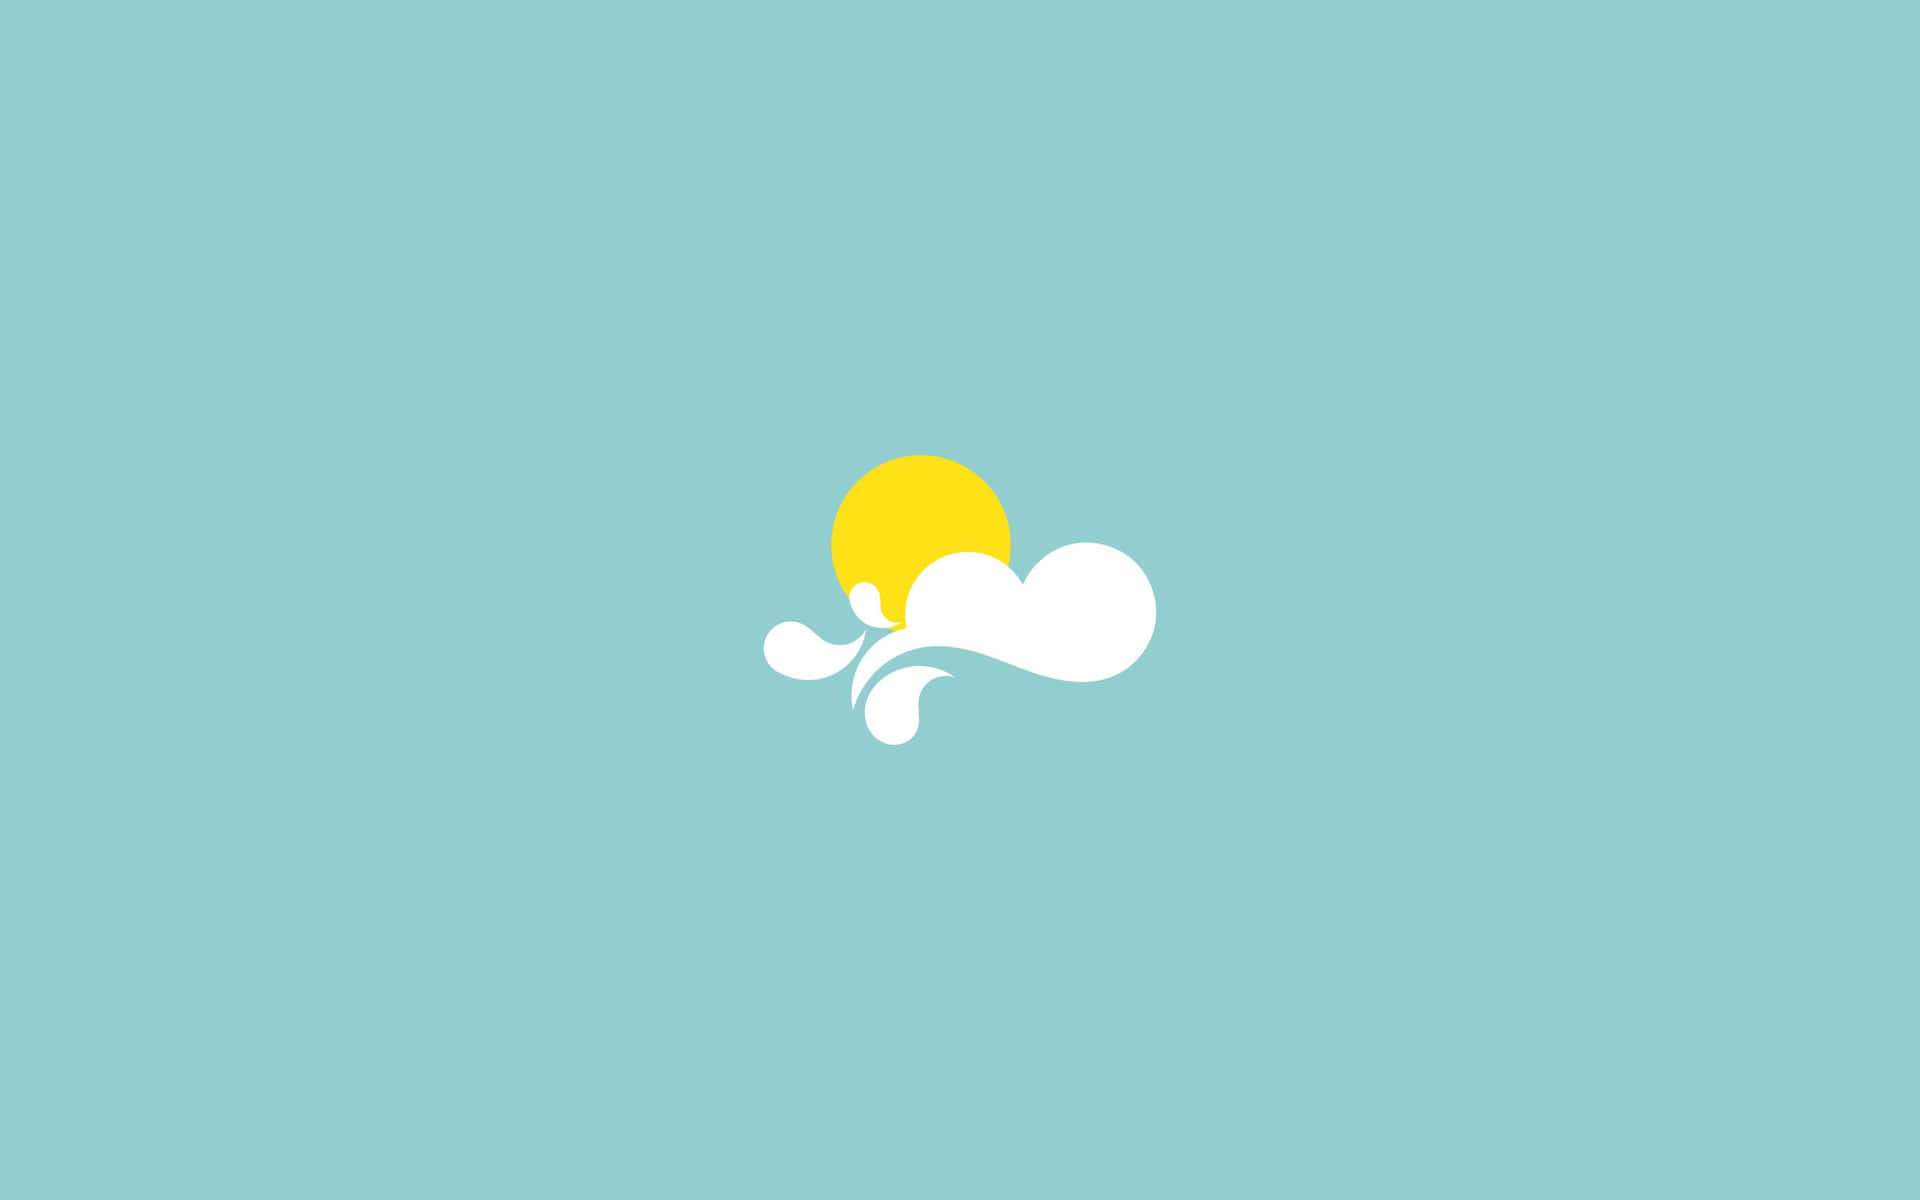 A Logo With A Yellow And White Bird On A Blue Background Wallpaper